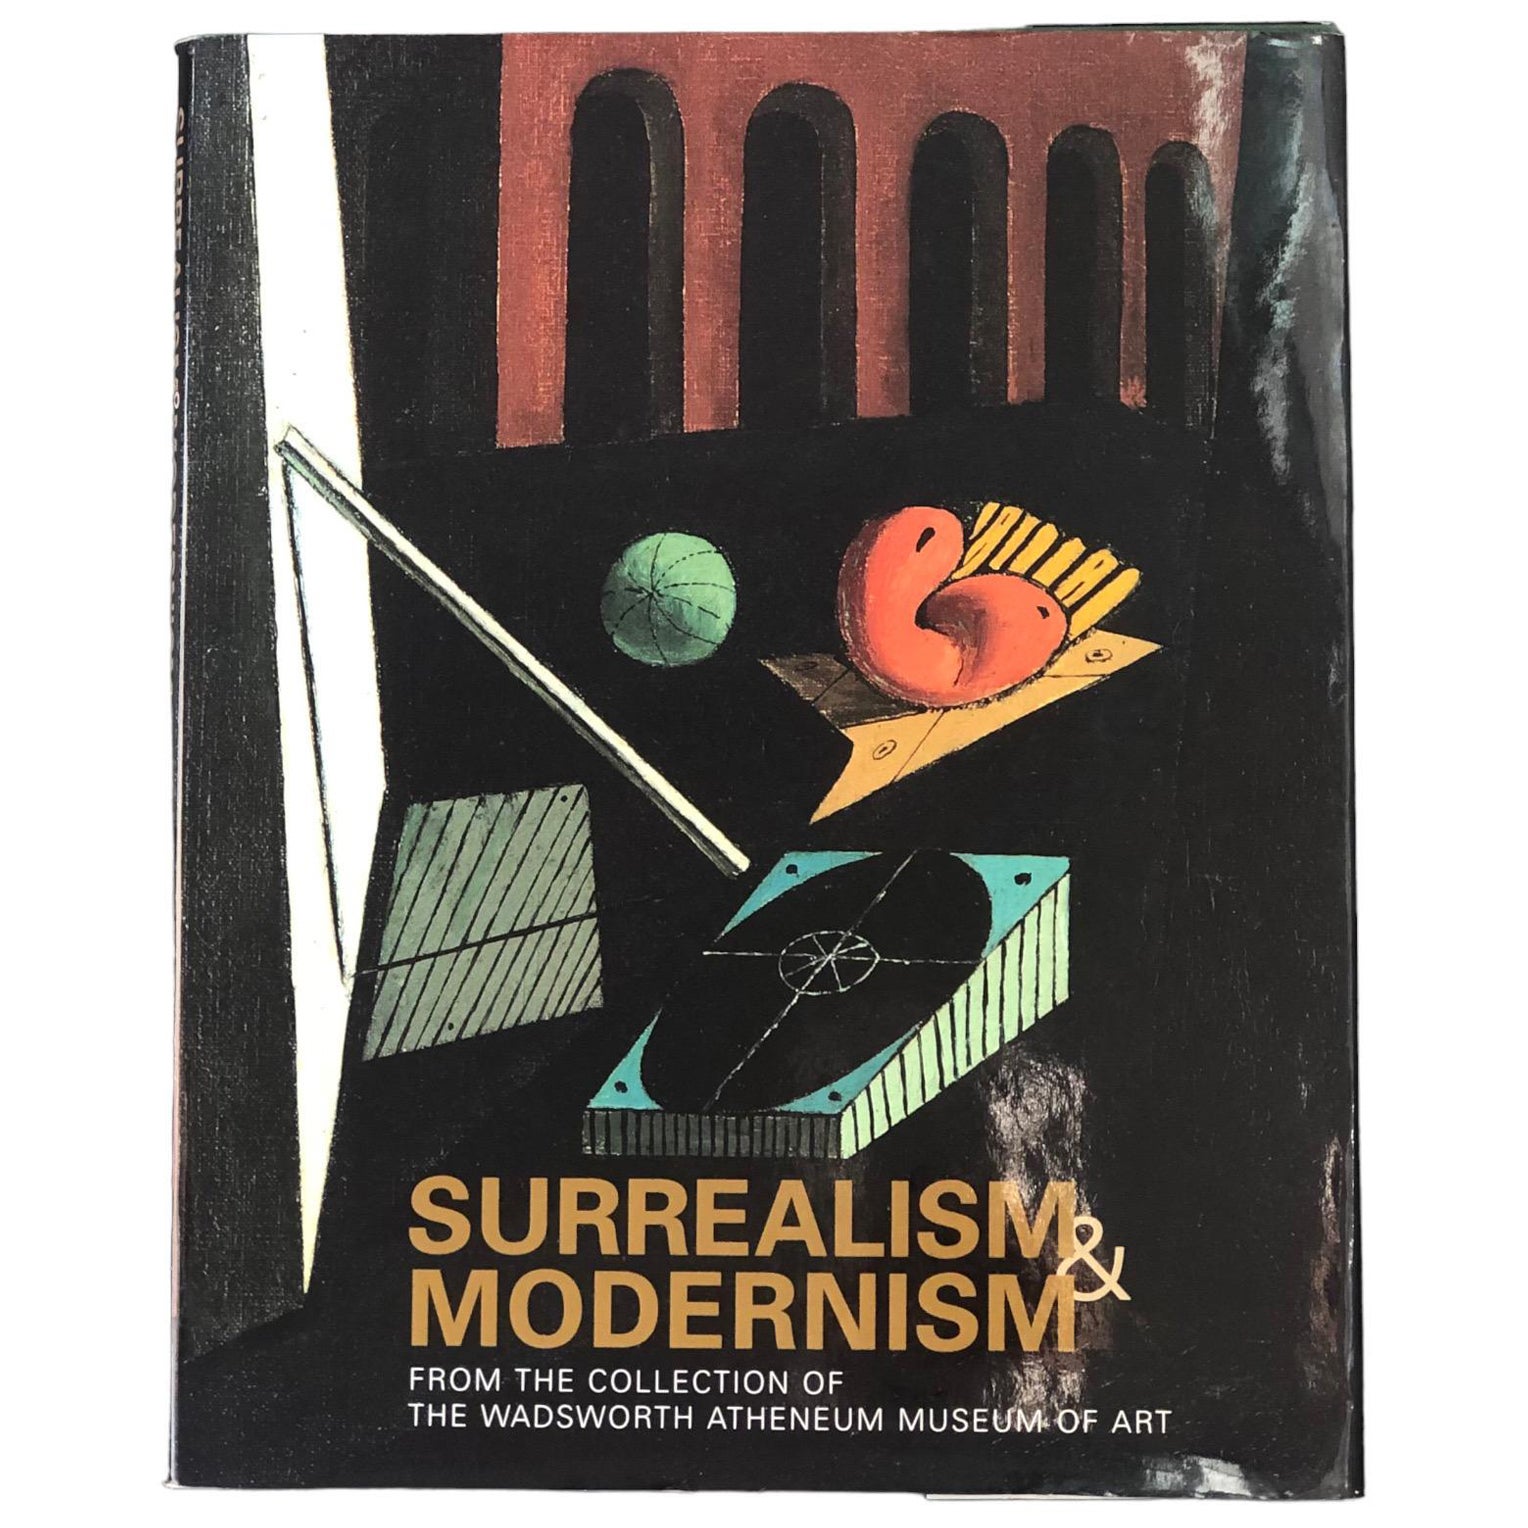 Surrealism & Modernism From the Collection of Wadsworth Atheneum Museum of Art